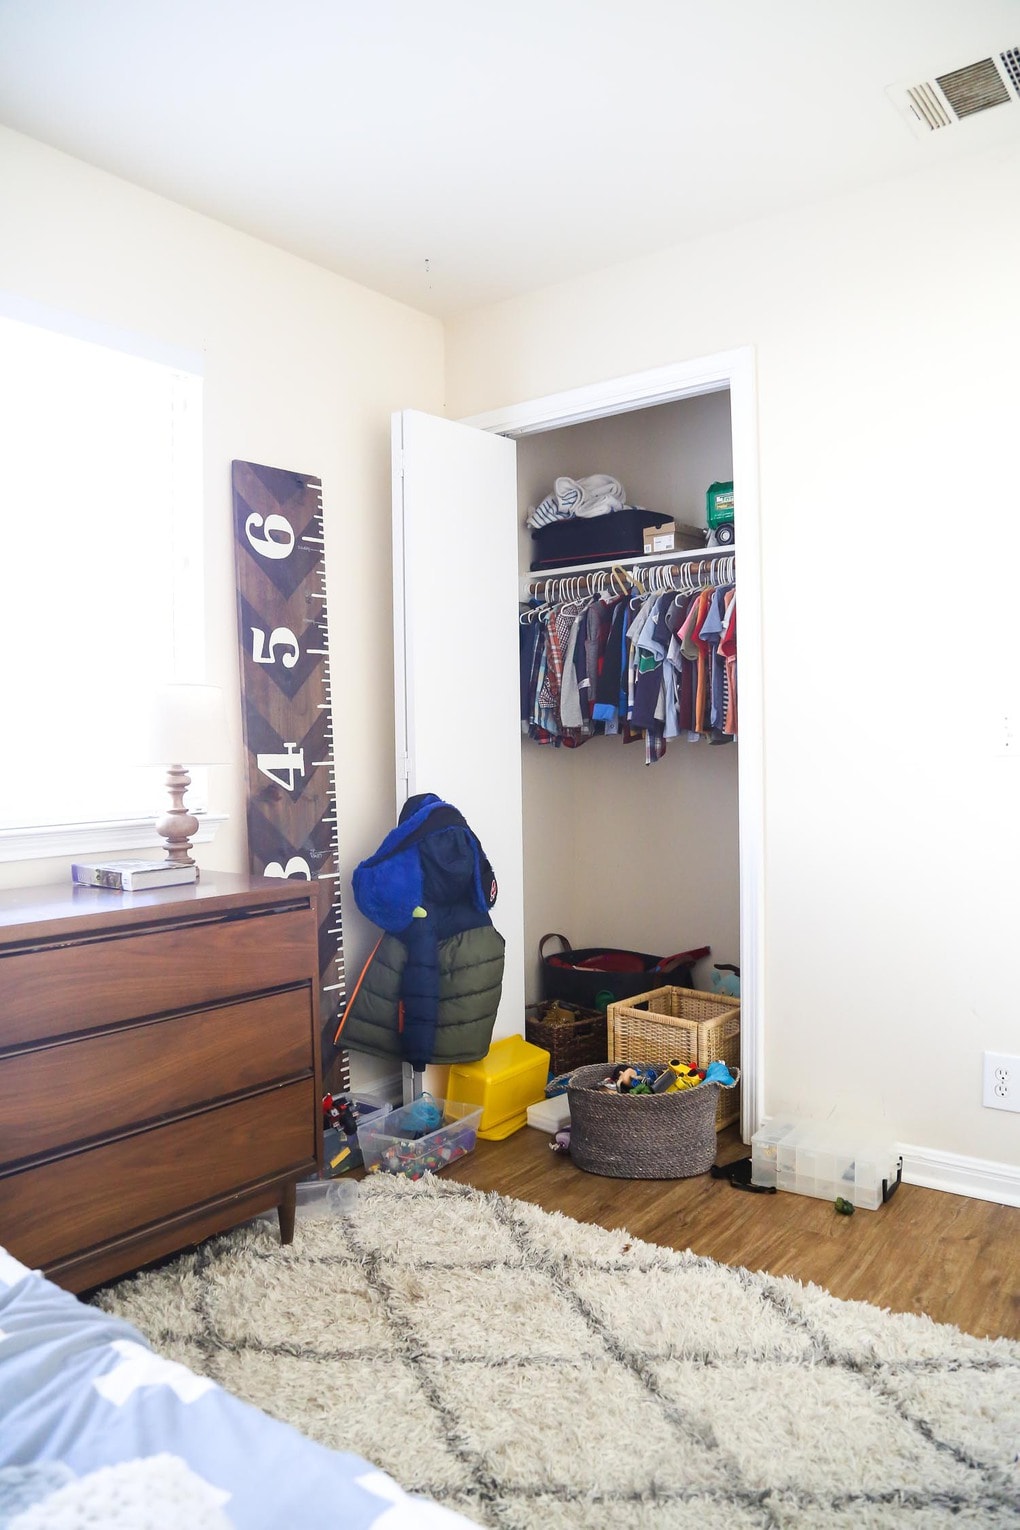 HOW TO FIX MESSY PLACES, HOME ORGANIZNG